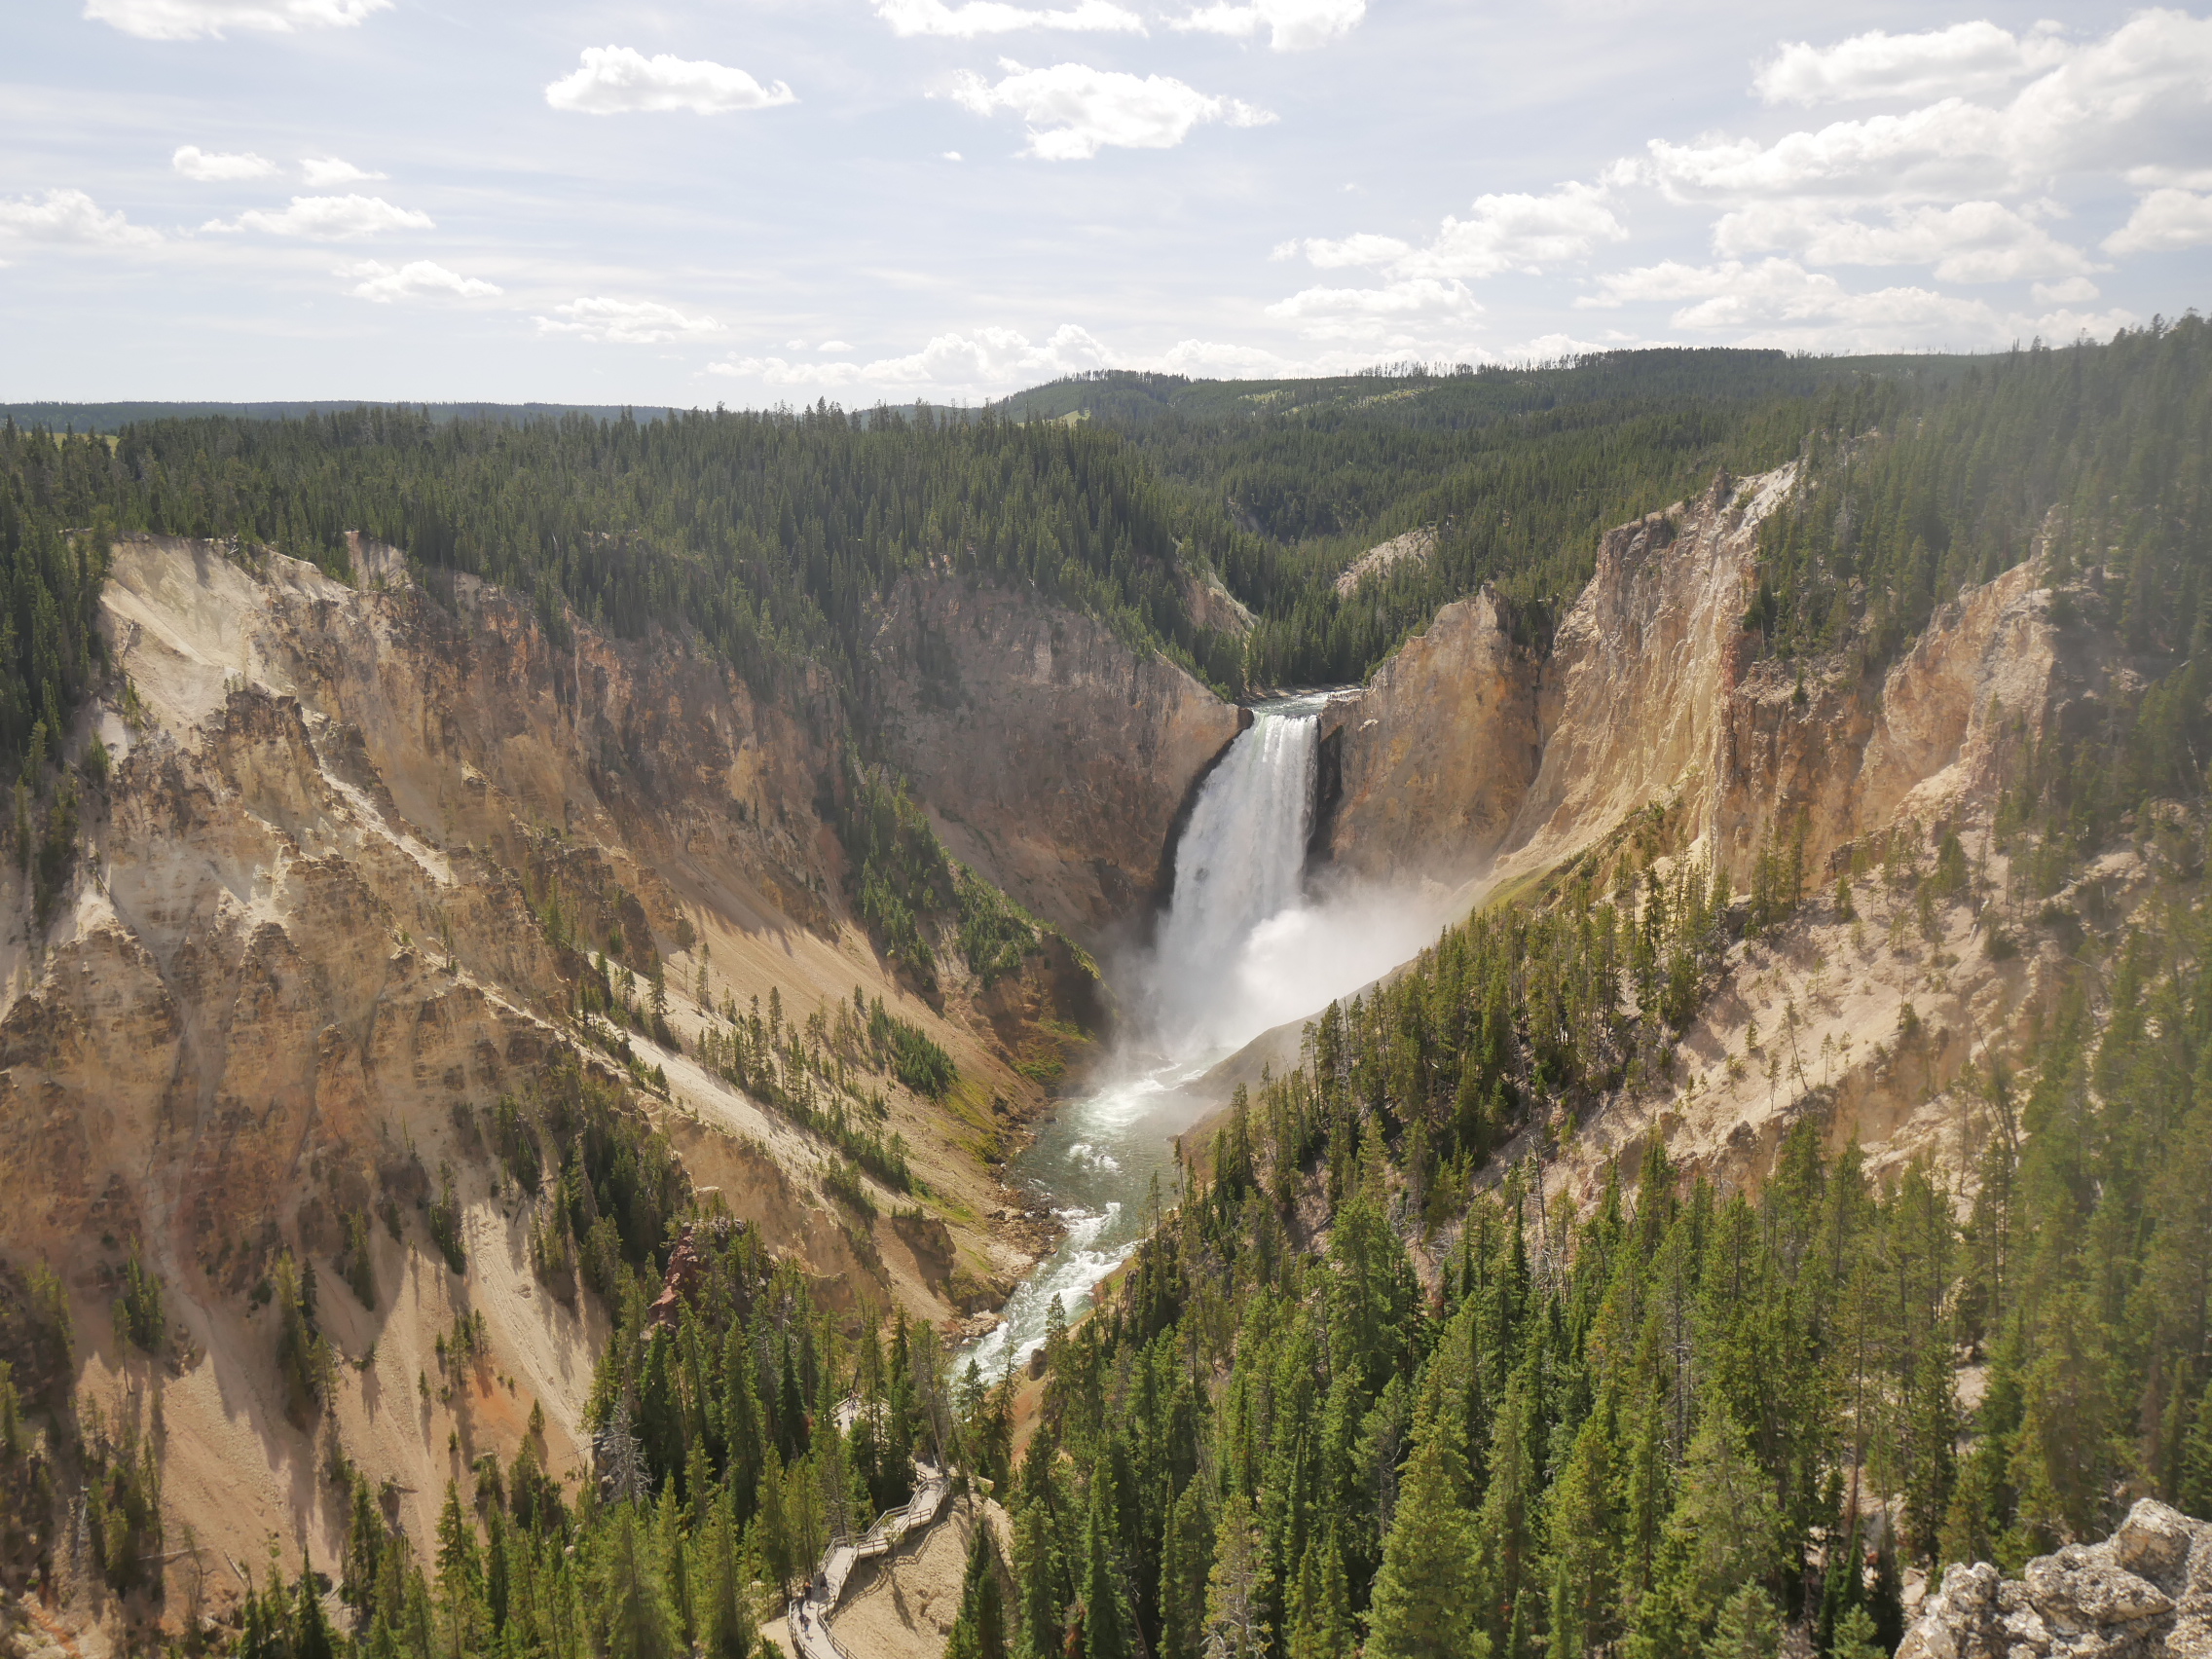 Tips when Visiting Yellowstone National Park